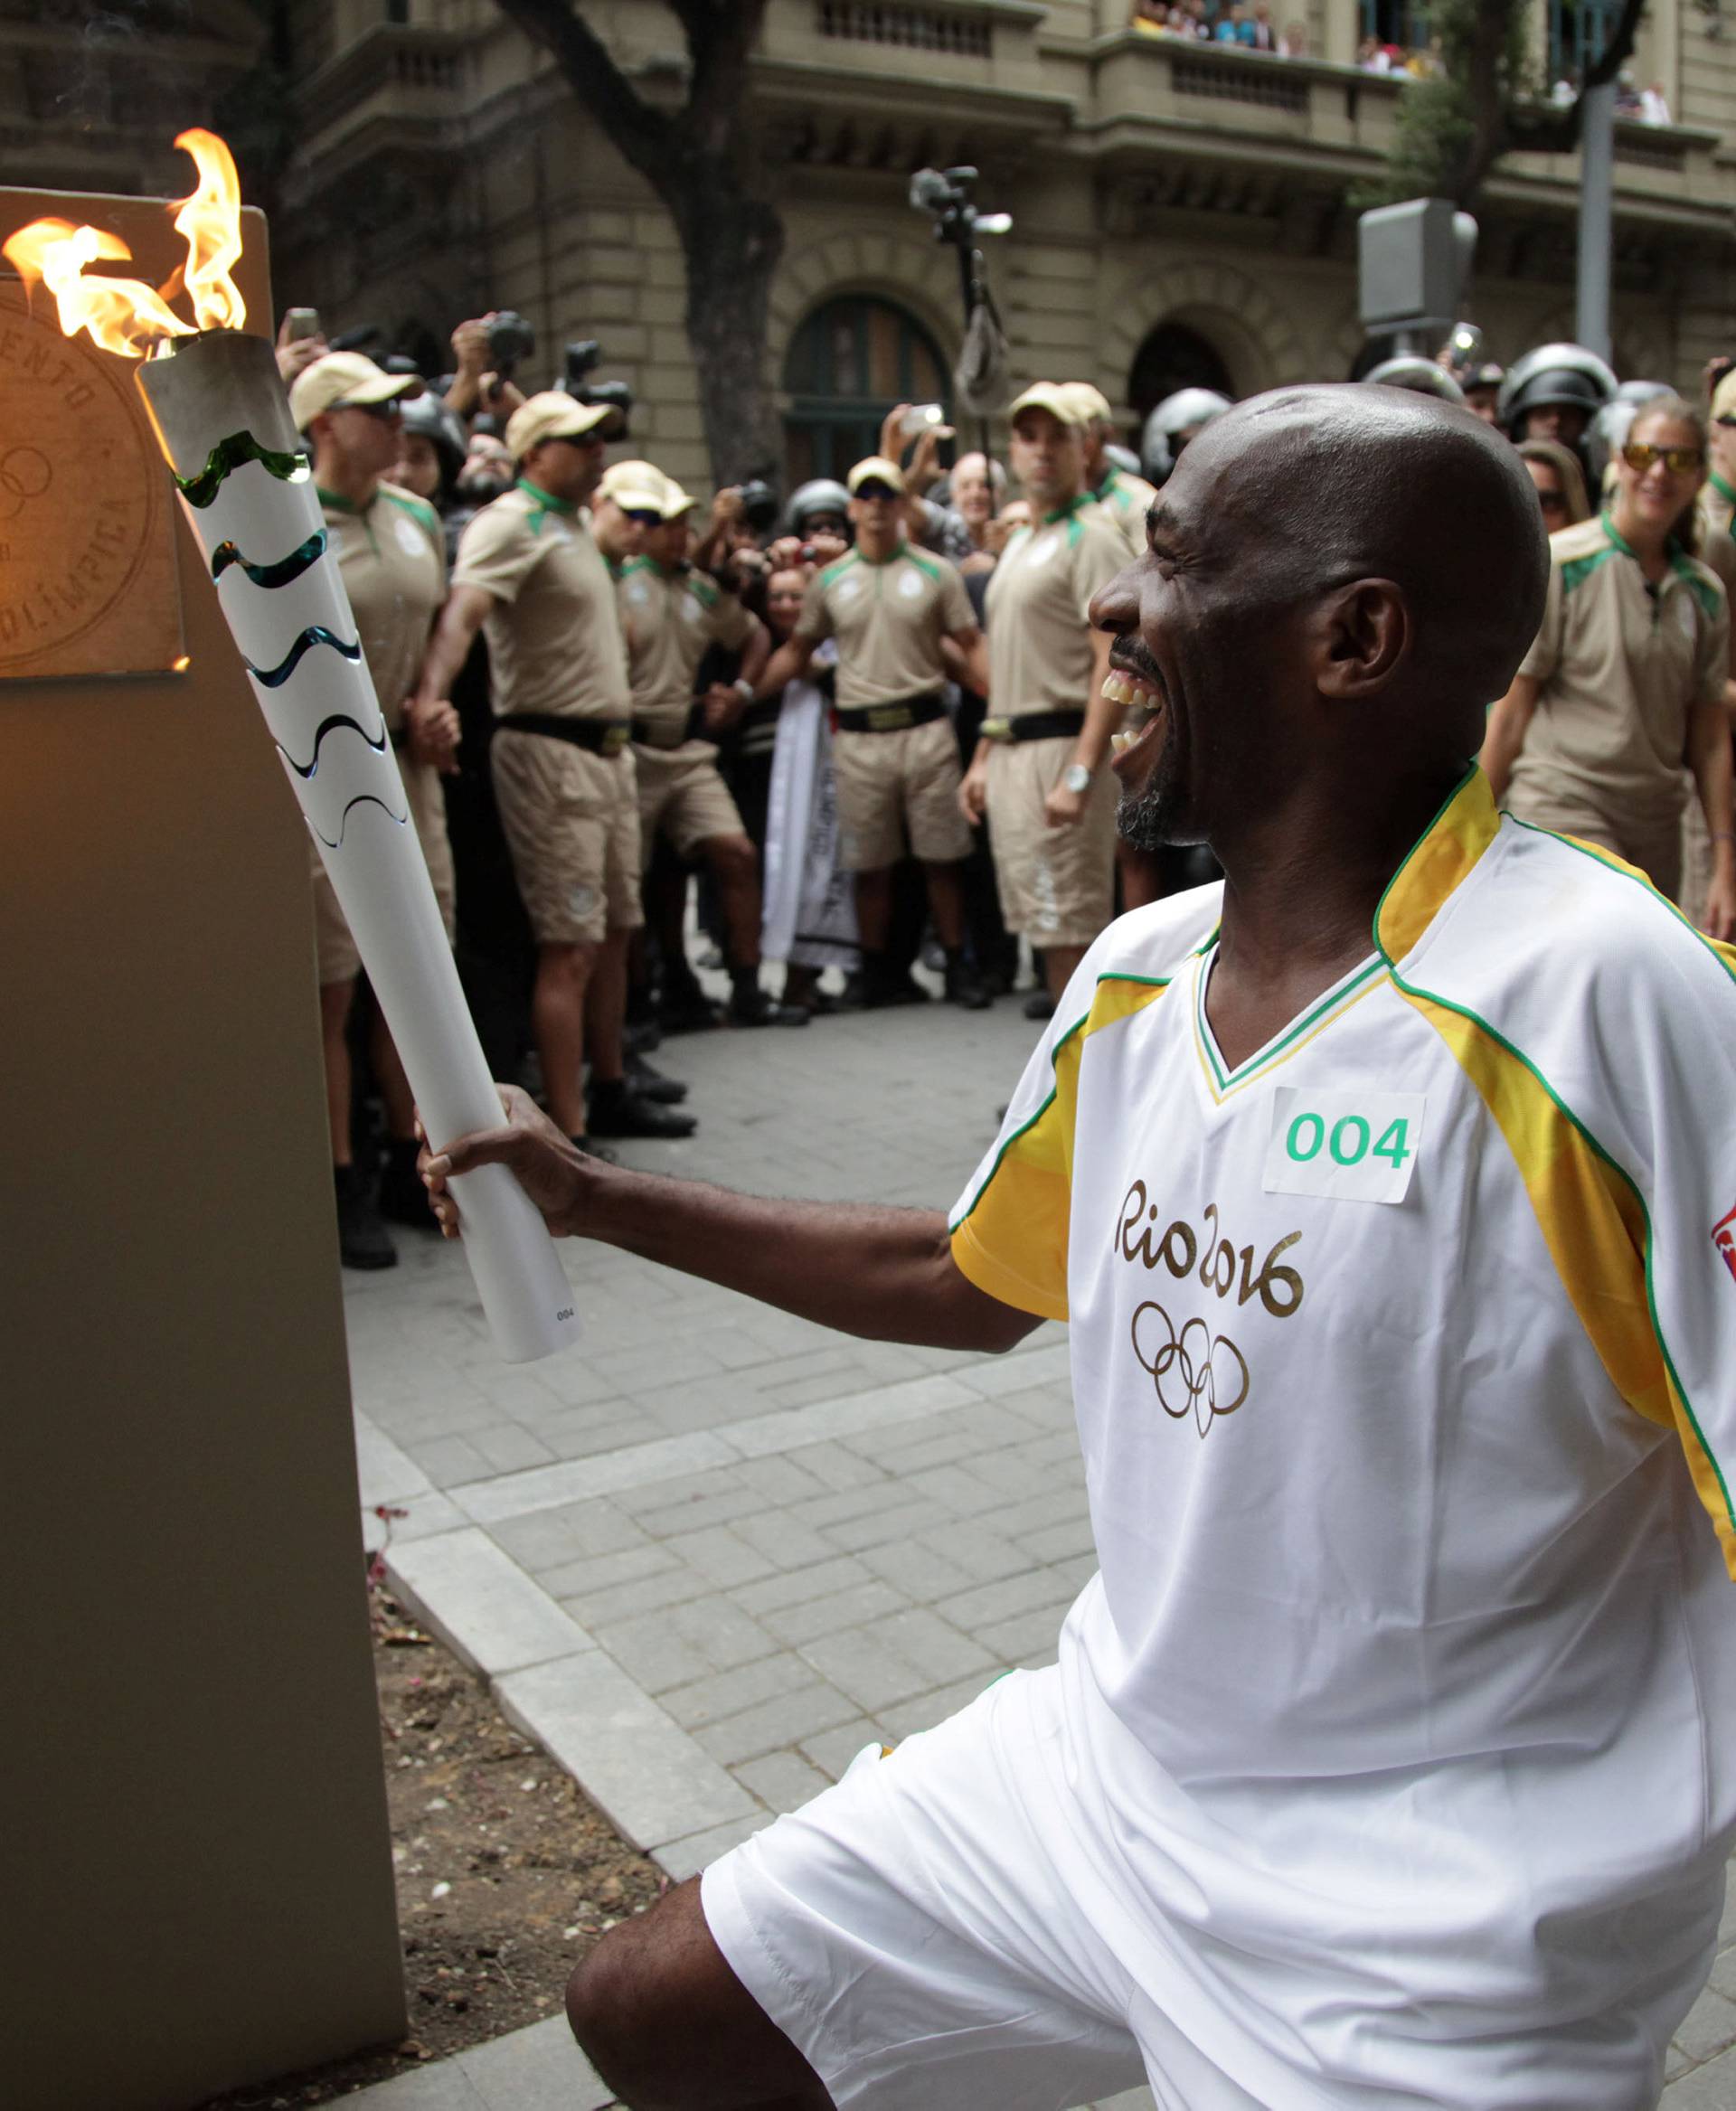 Street sweeper Renato Sorriso smiles while lighting the first of five posts with the Olympic torch in Rio de Janeiro